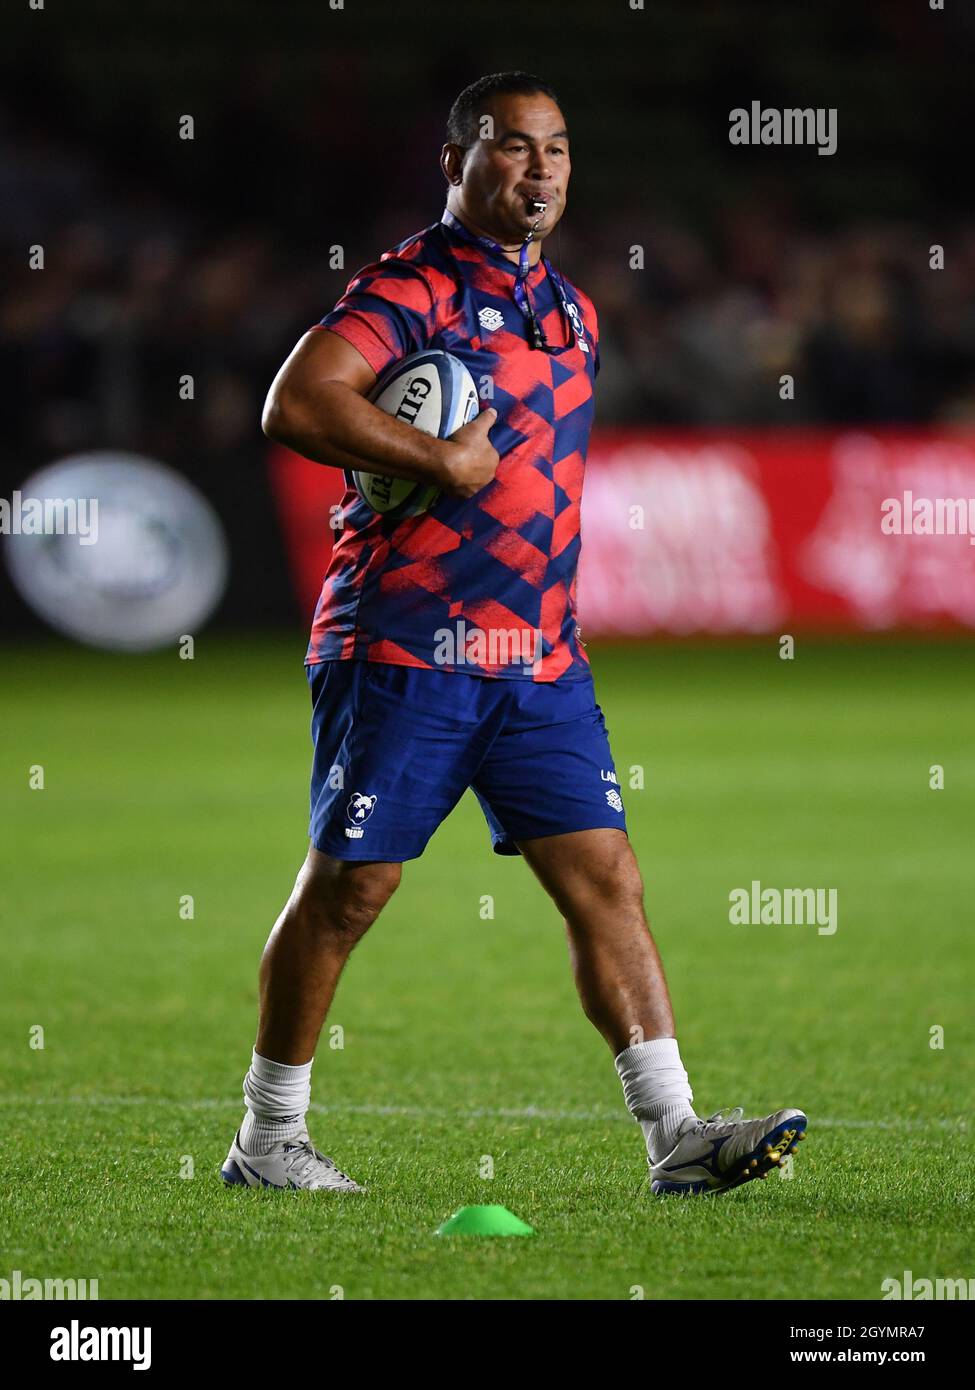 Twickenham Stoop Stadium, UK, UK. 8th October, 2021. Bristol Bears' Head Coach Pat Lam during the pre match warm up before the Gallagher English Premiership game between Harlequins and Bristol Bears: Credit: Ashley Western/Alamy Live News Stock Photo